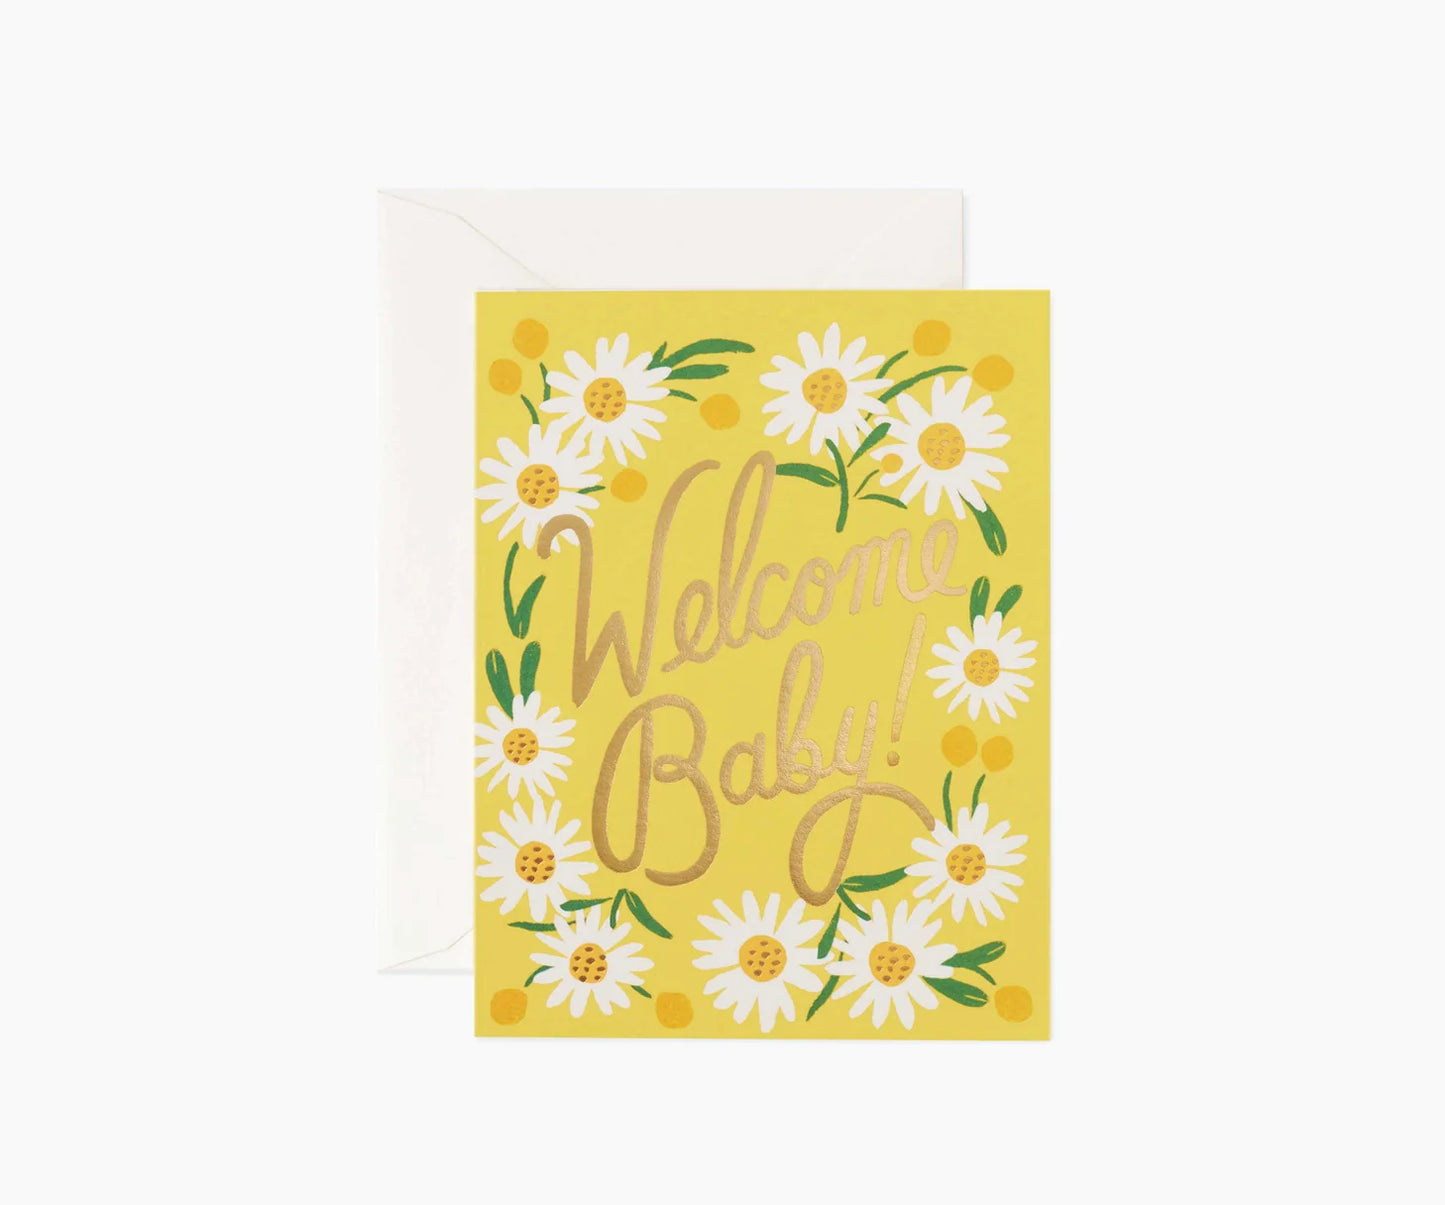 Rifle Paper Cards - Baby Shower